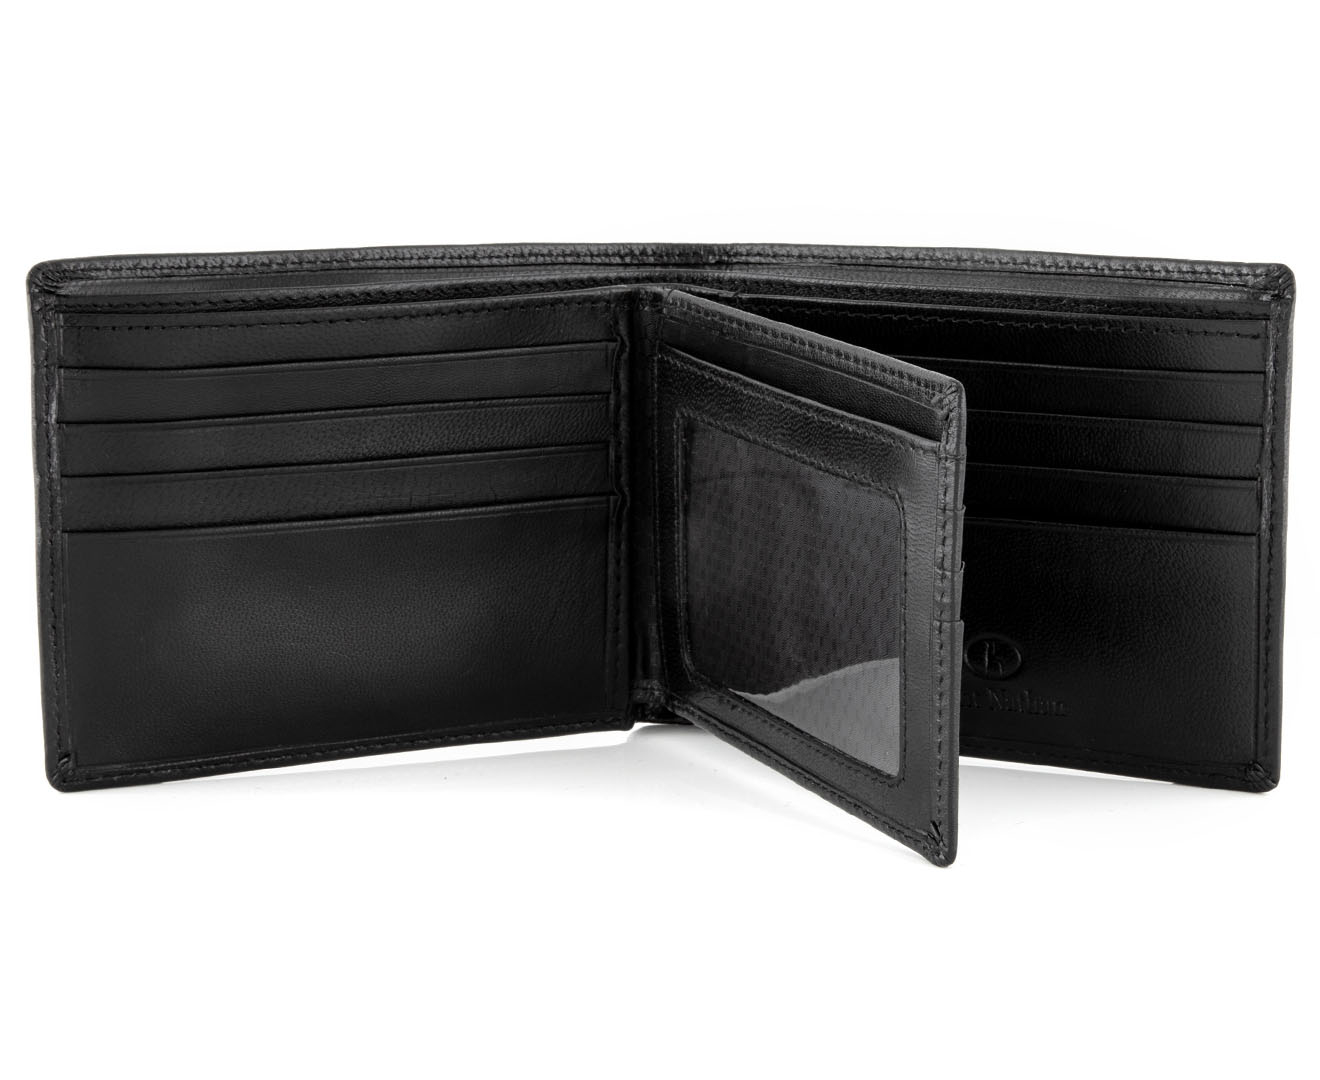 Trent Nathan Leather Bifold Wallet - Black | Catch.co.nz